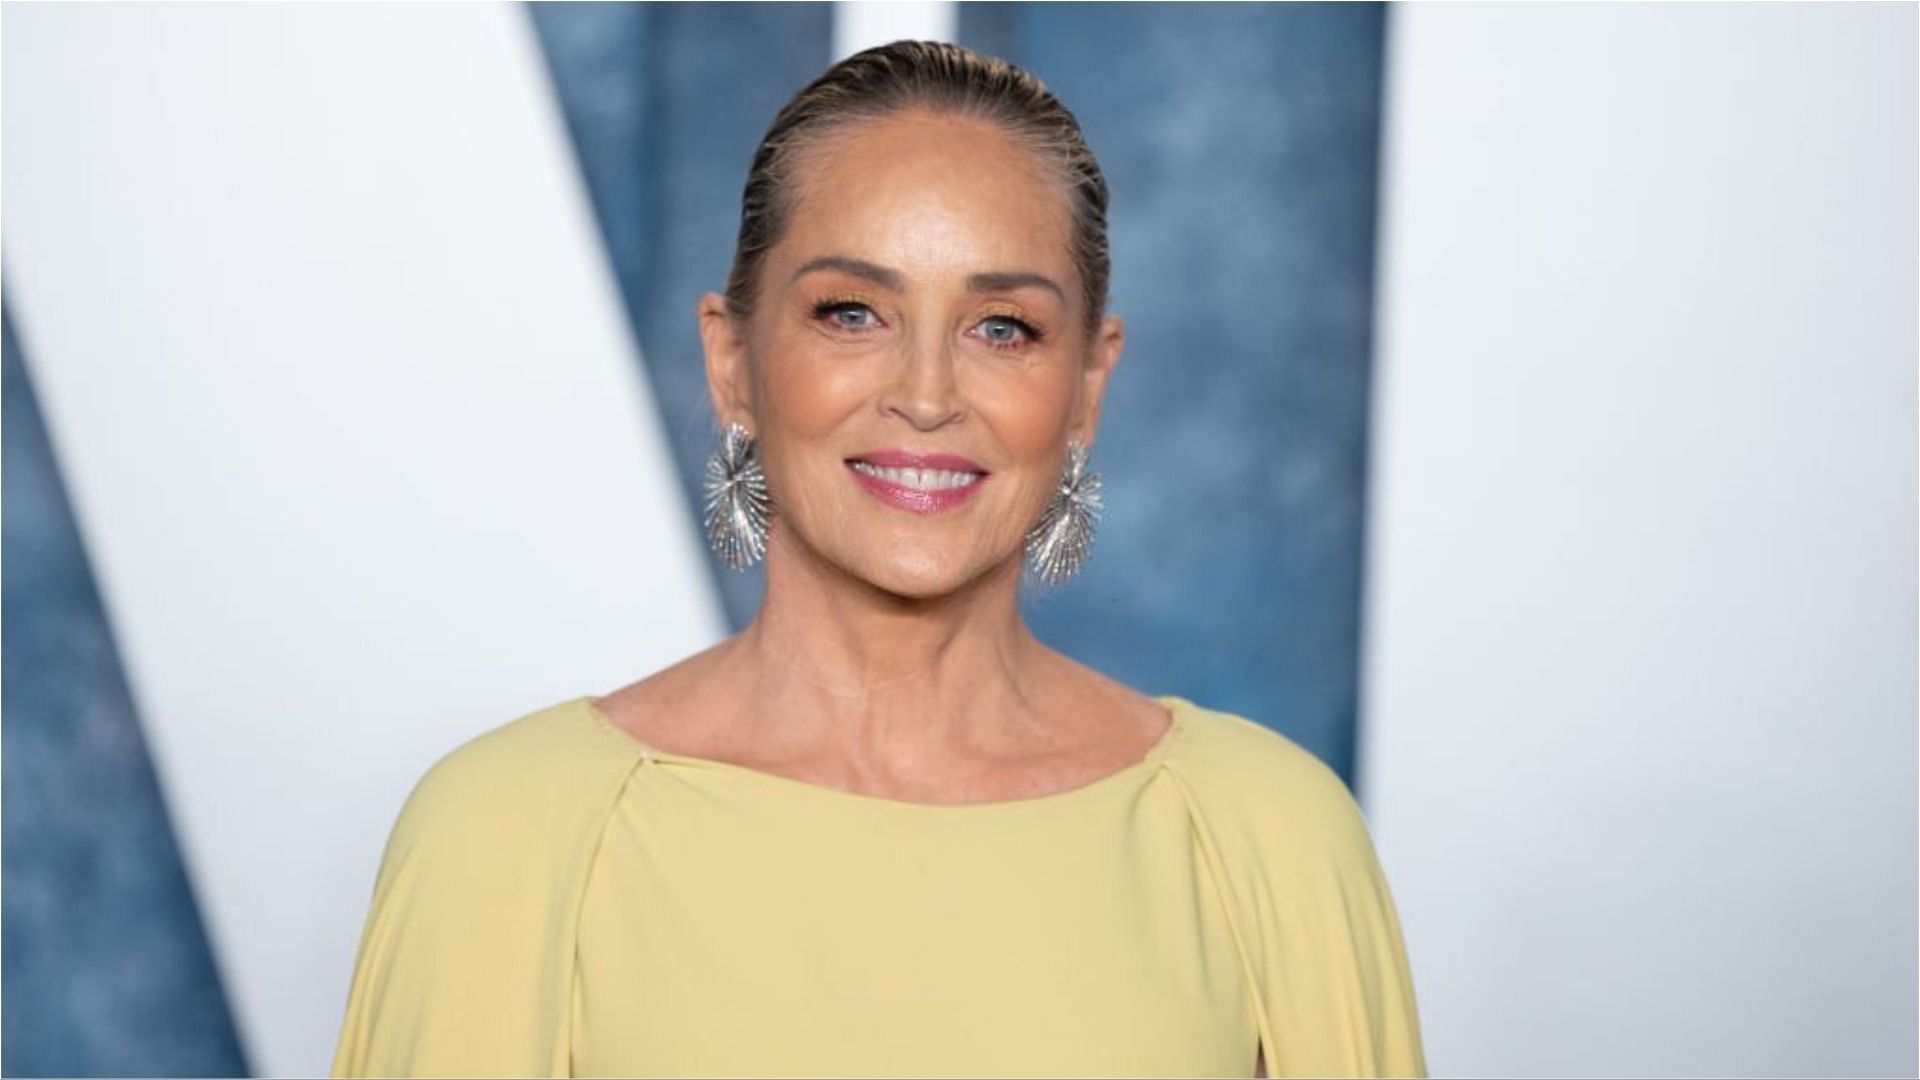 Sharon Stone has accumulated a lot of wealth from her work in films and TV shows (Image via Robert Smith/Getty Images)